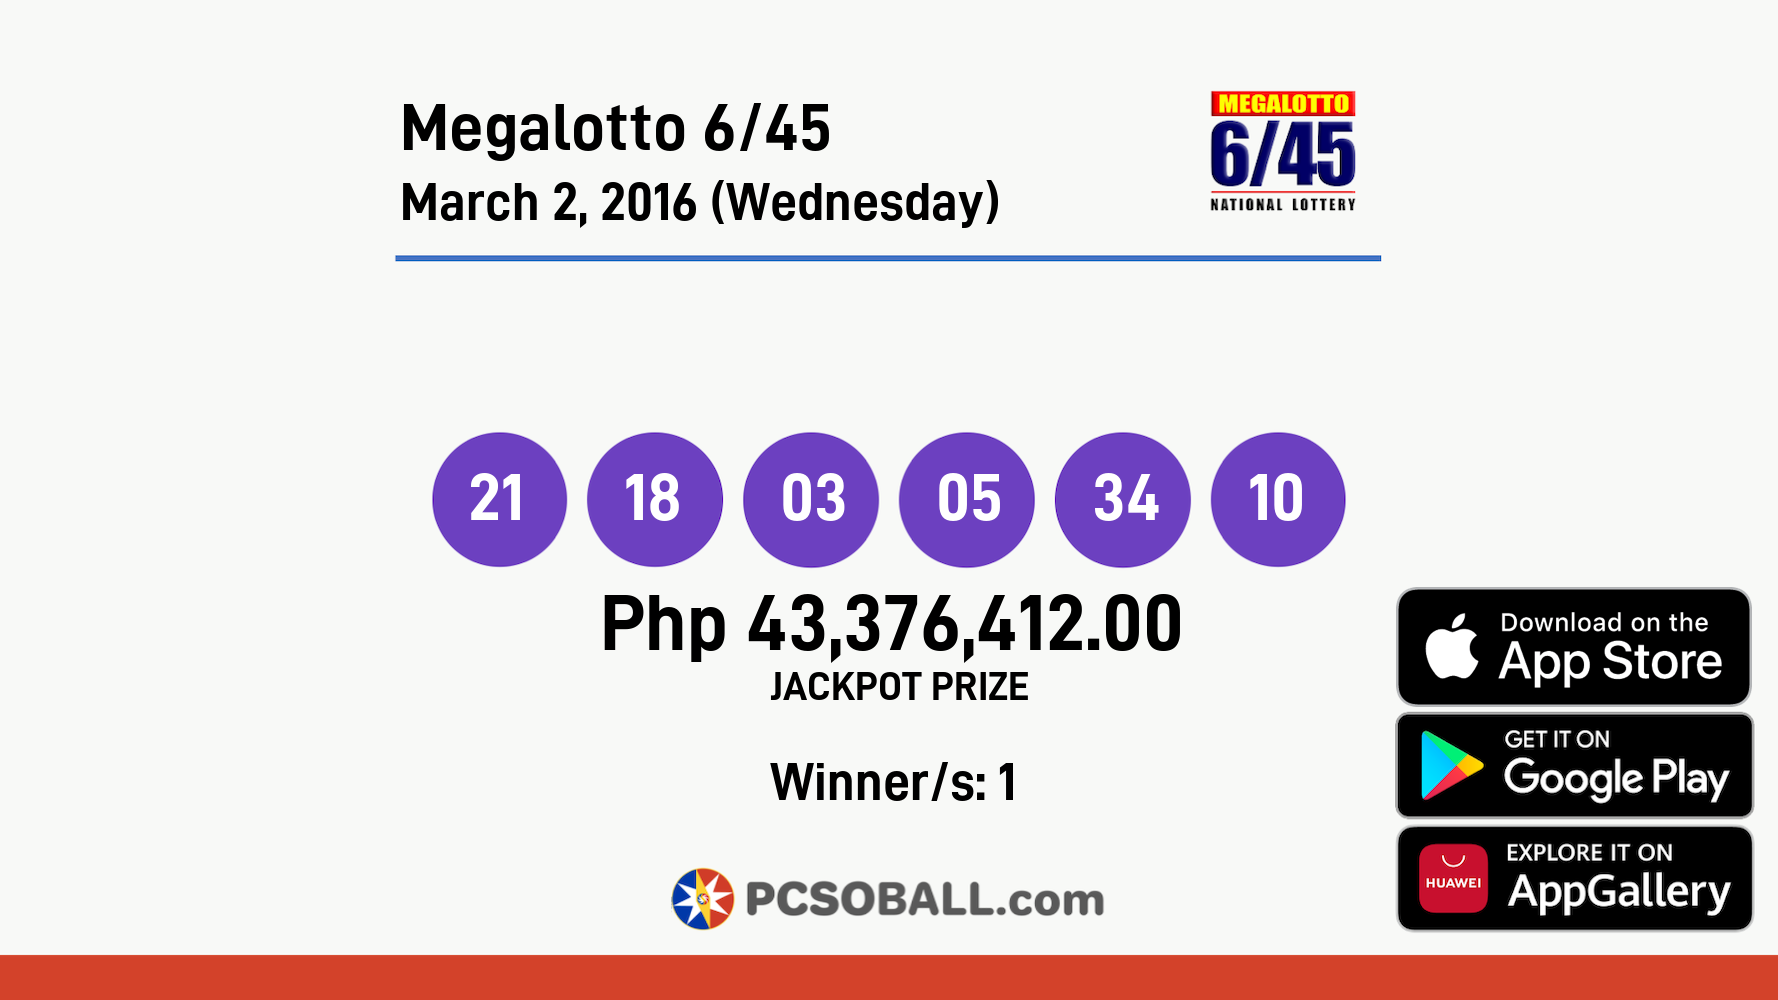 Megalotto 6/45 March 2, 2016 (Wednesday) Result